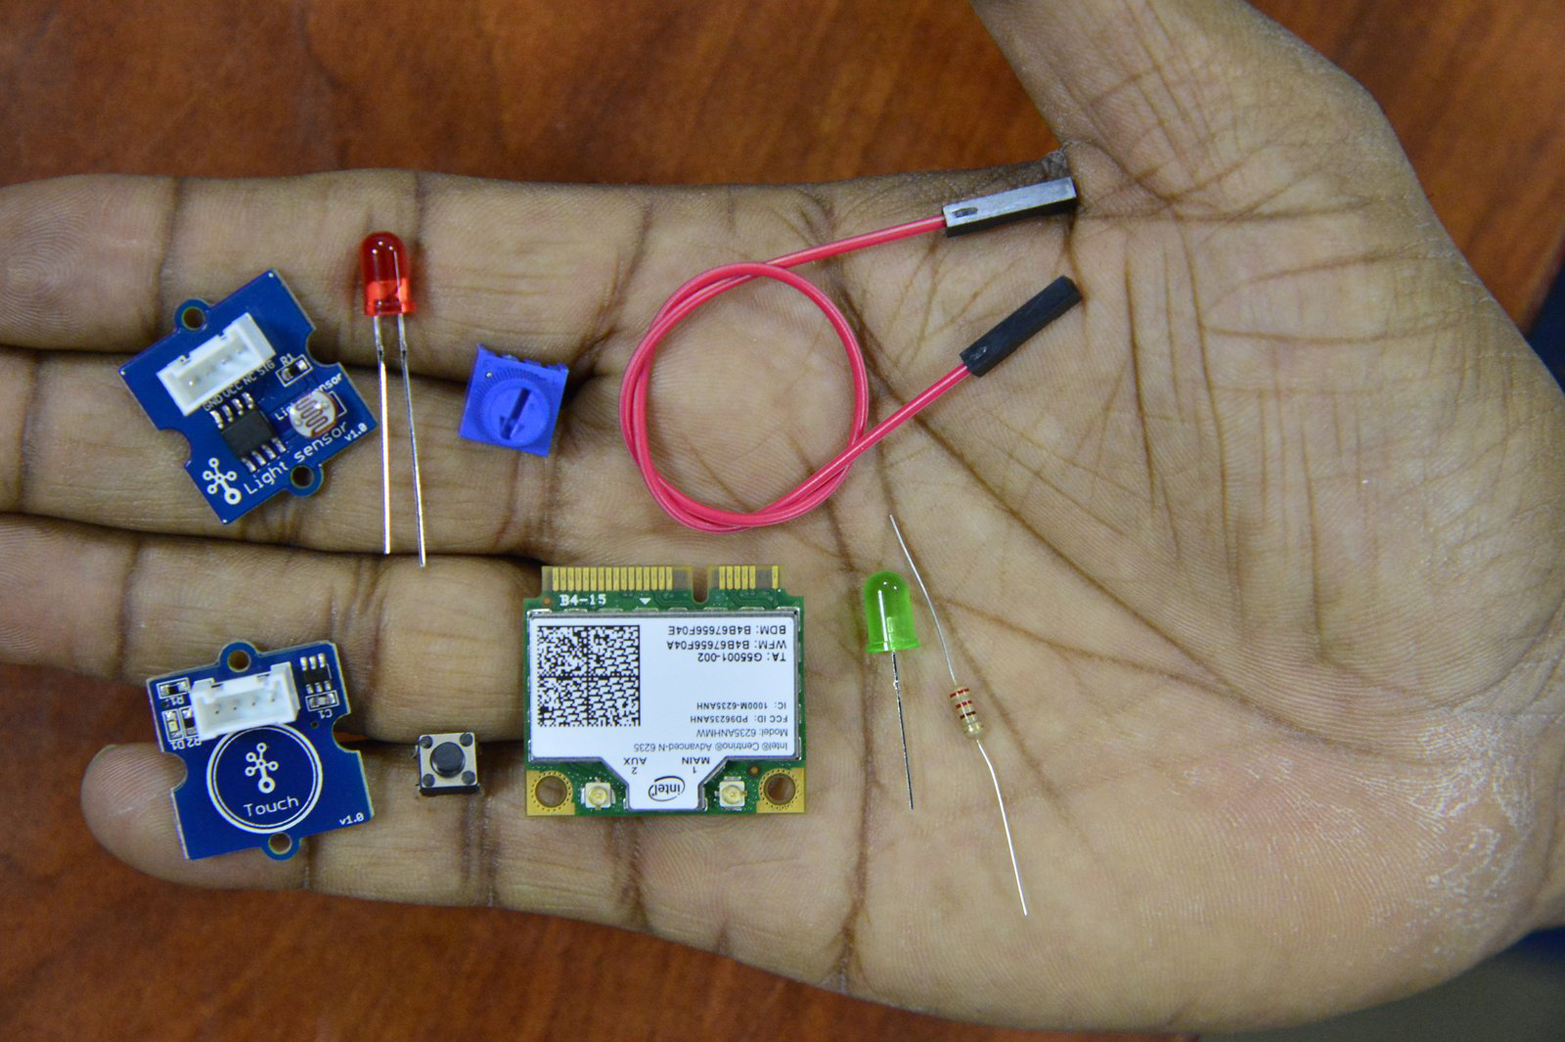 You’ll need a variety of components to make your electrical prototypes (photo courtesy of Flickr user Intel Free Press)